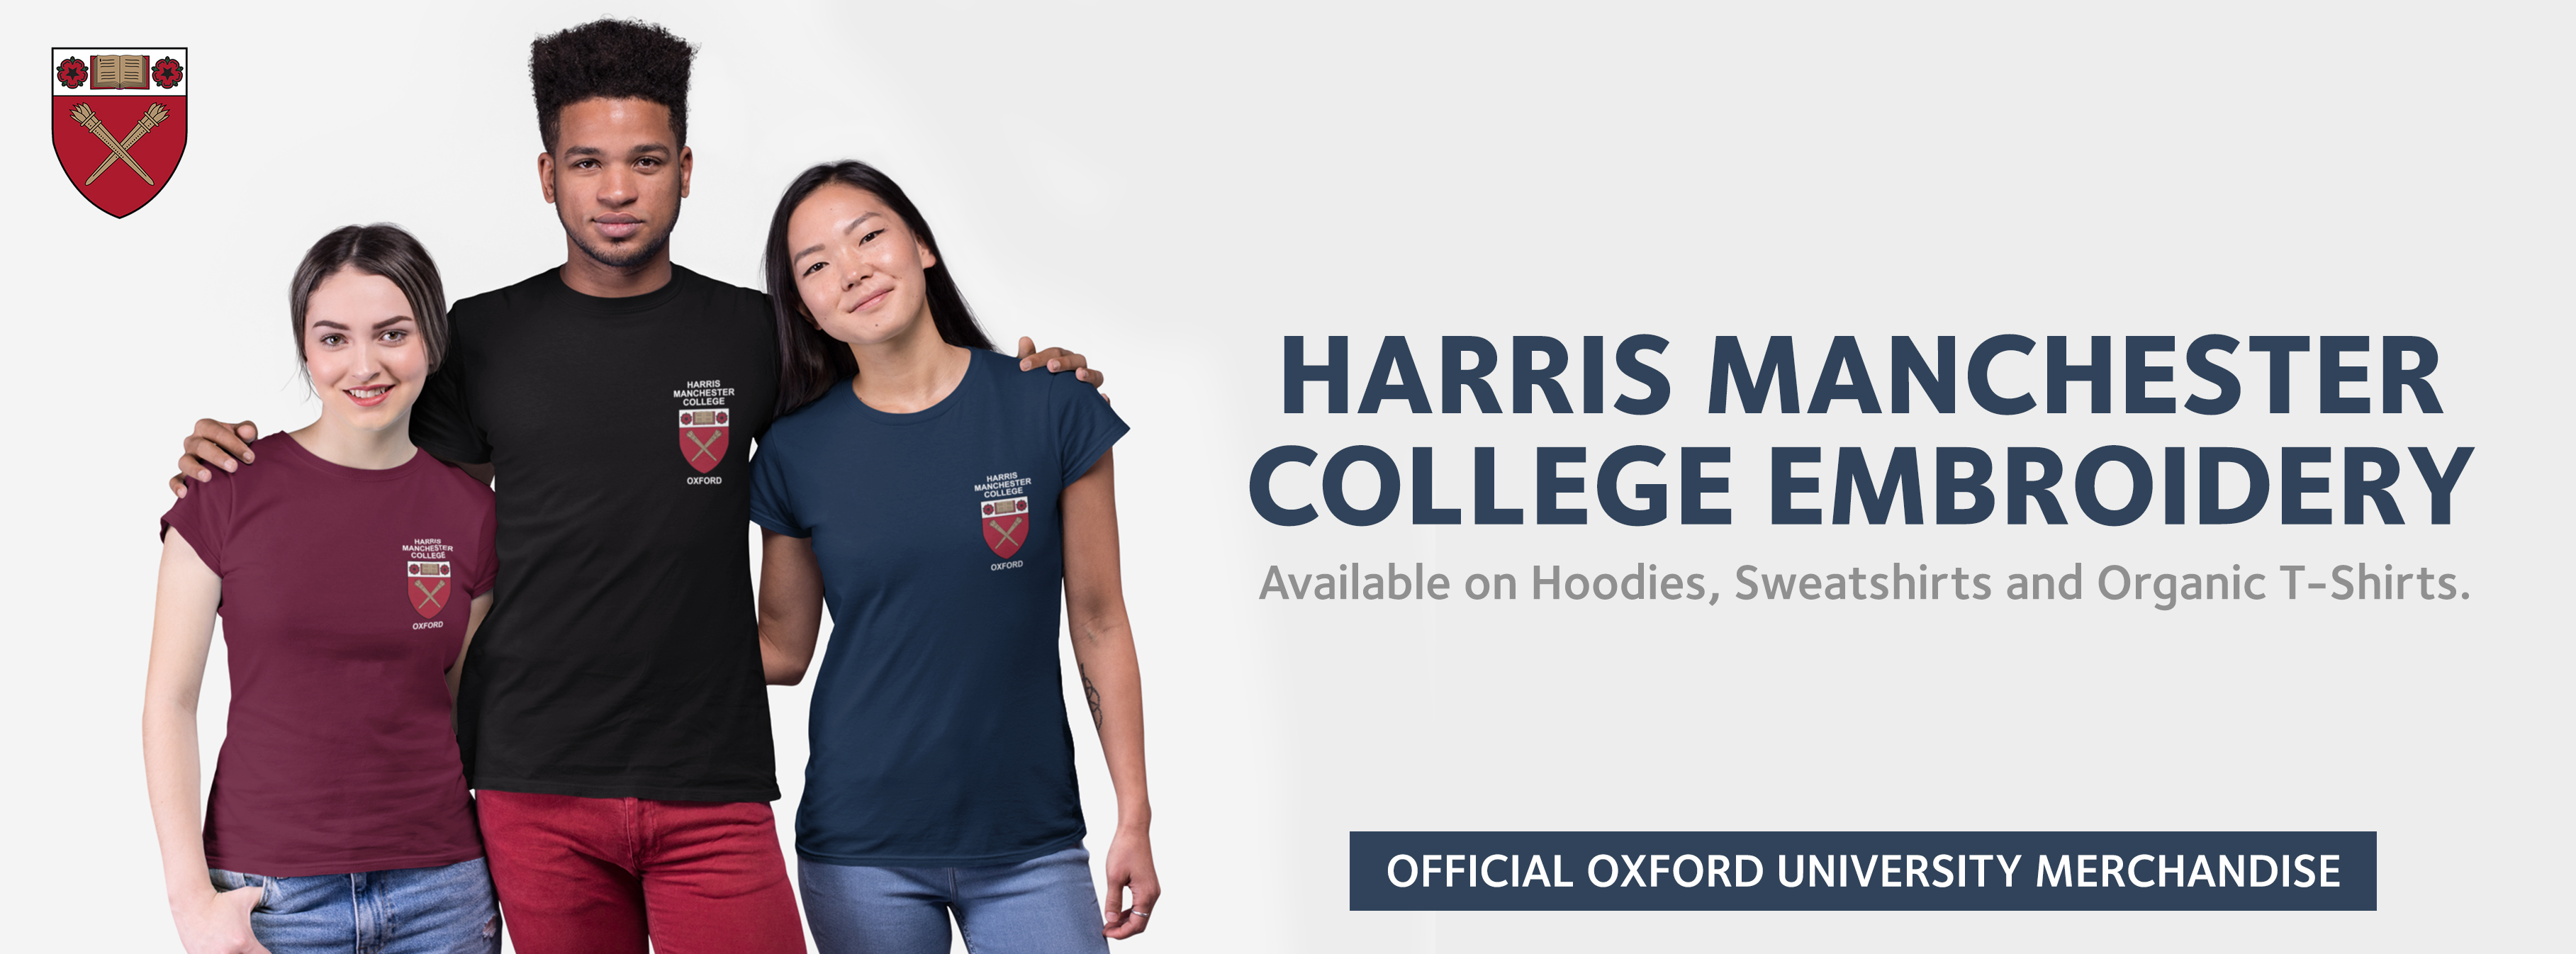 harris-manchester-college-embroidery-2.jpg